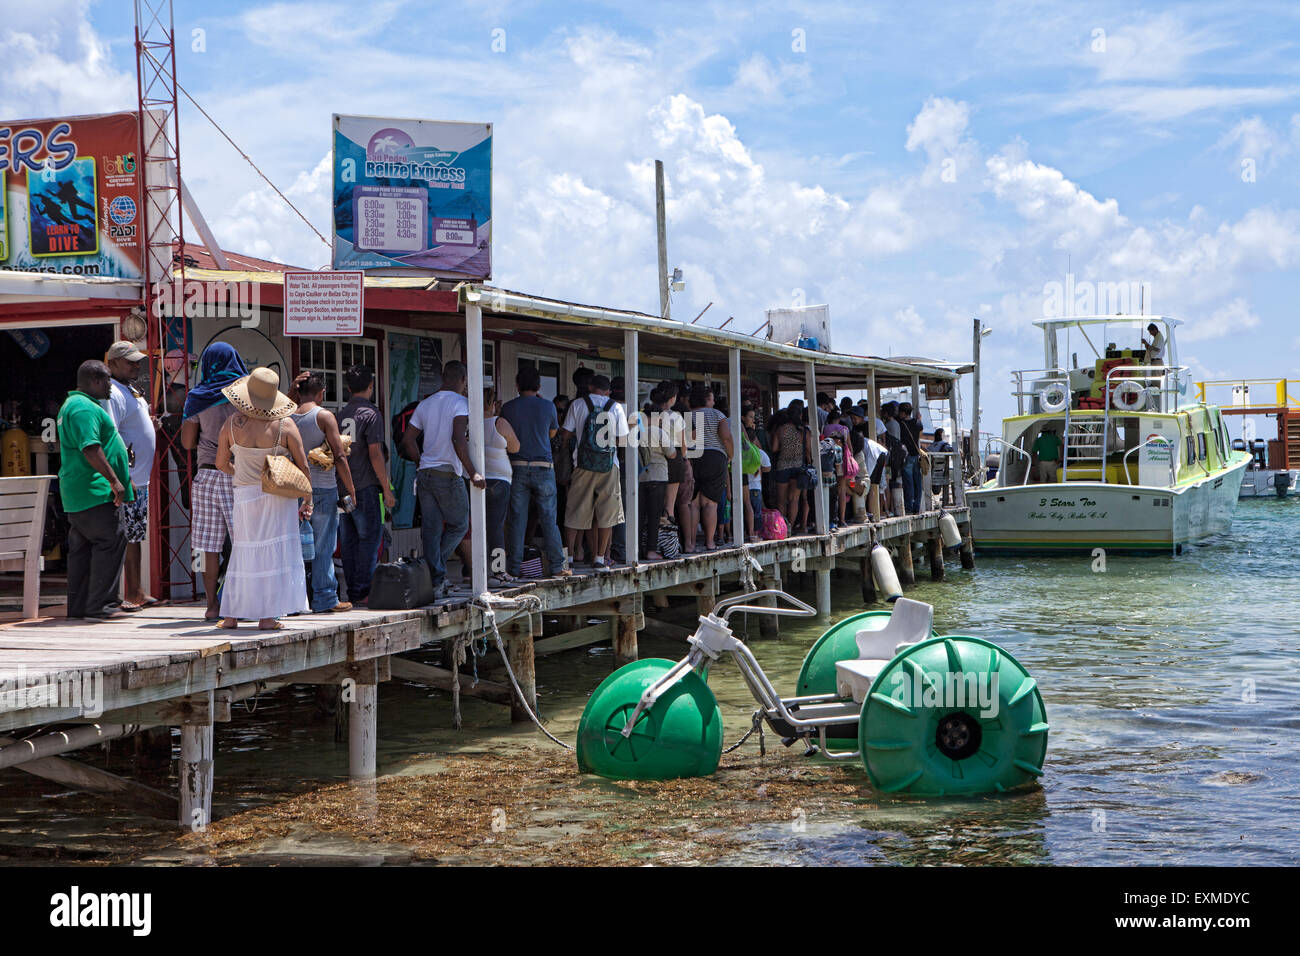 Group of people waiting in line to board the Belize Express Water Taxi in San Pedro, Ambergris Caye, Belize, Central America. Stock Photo